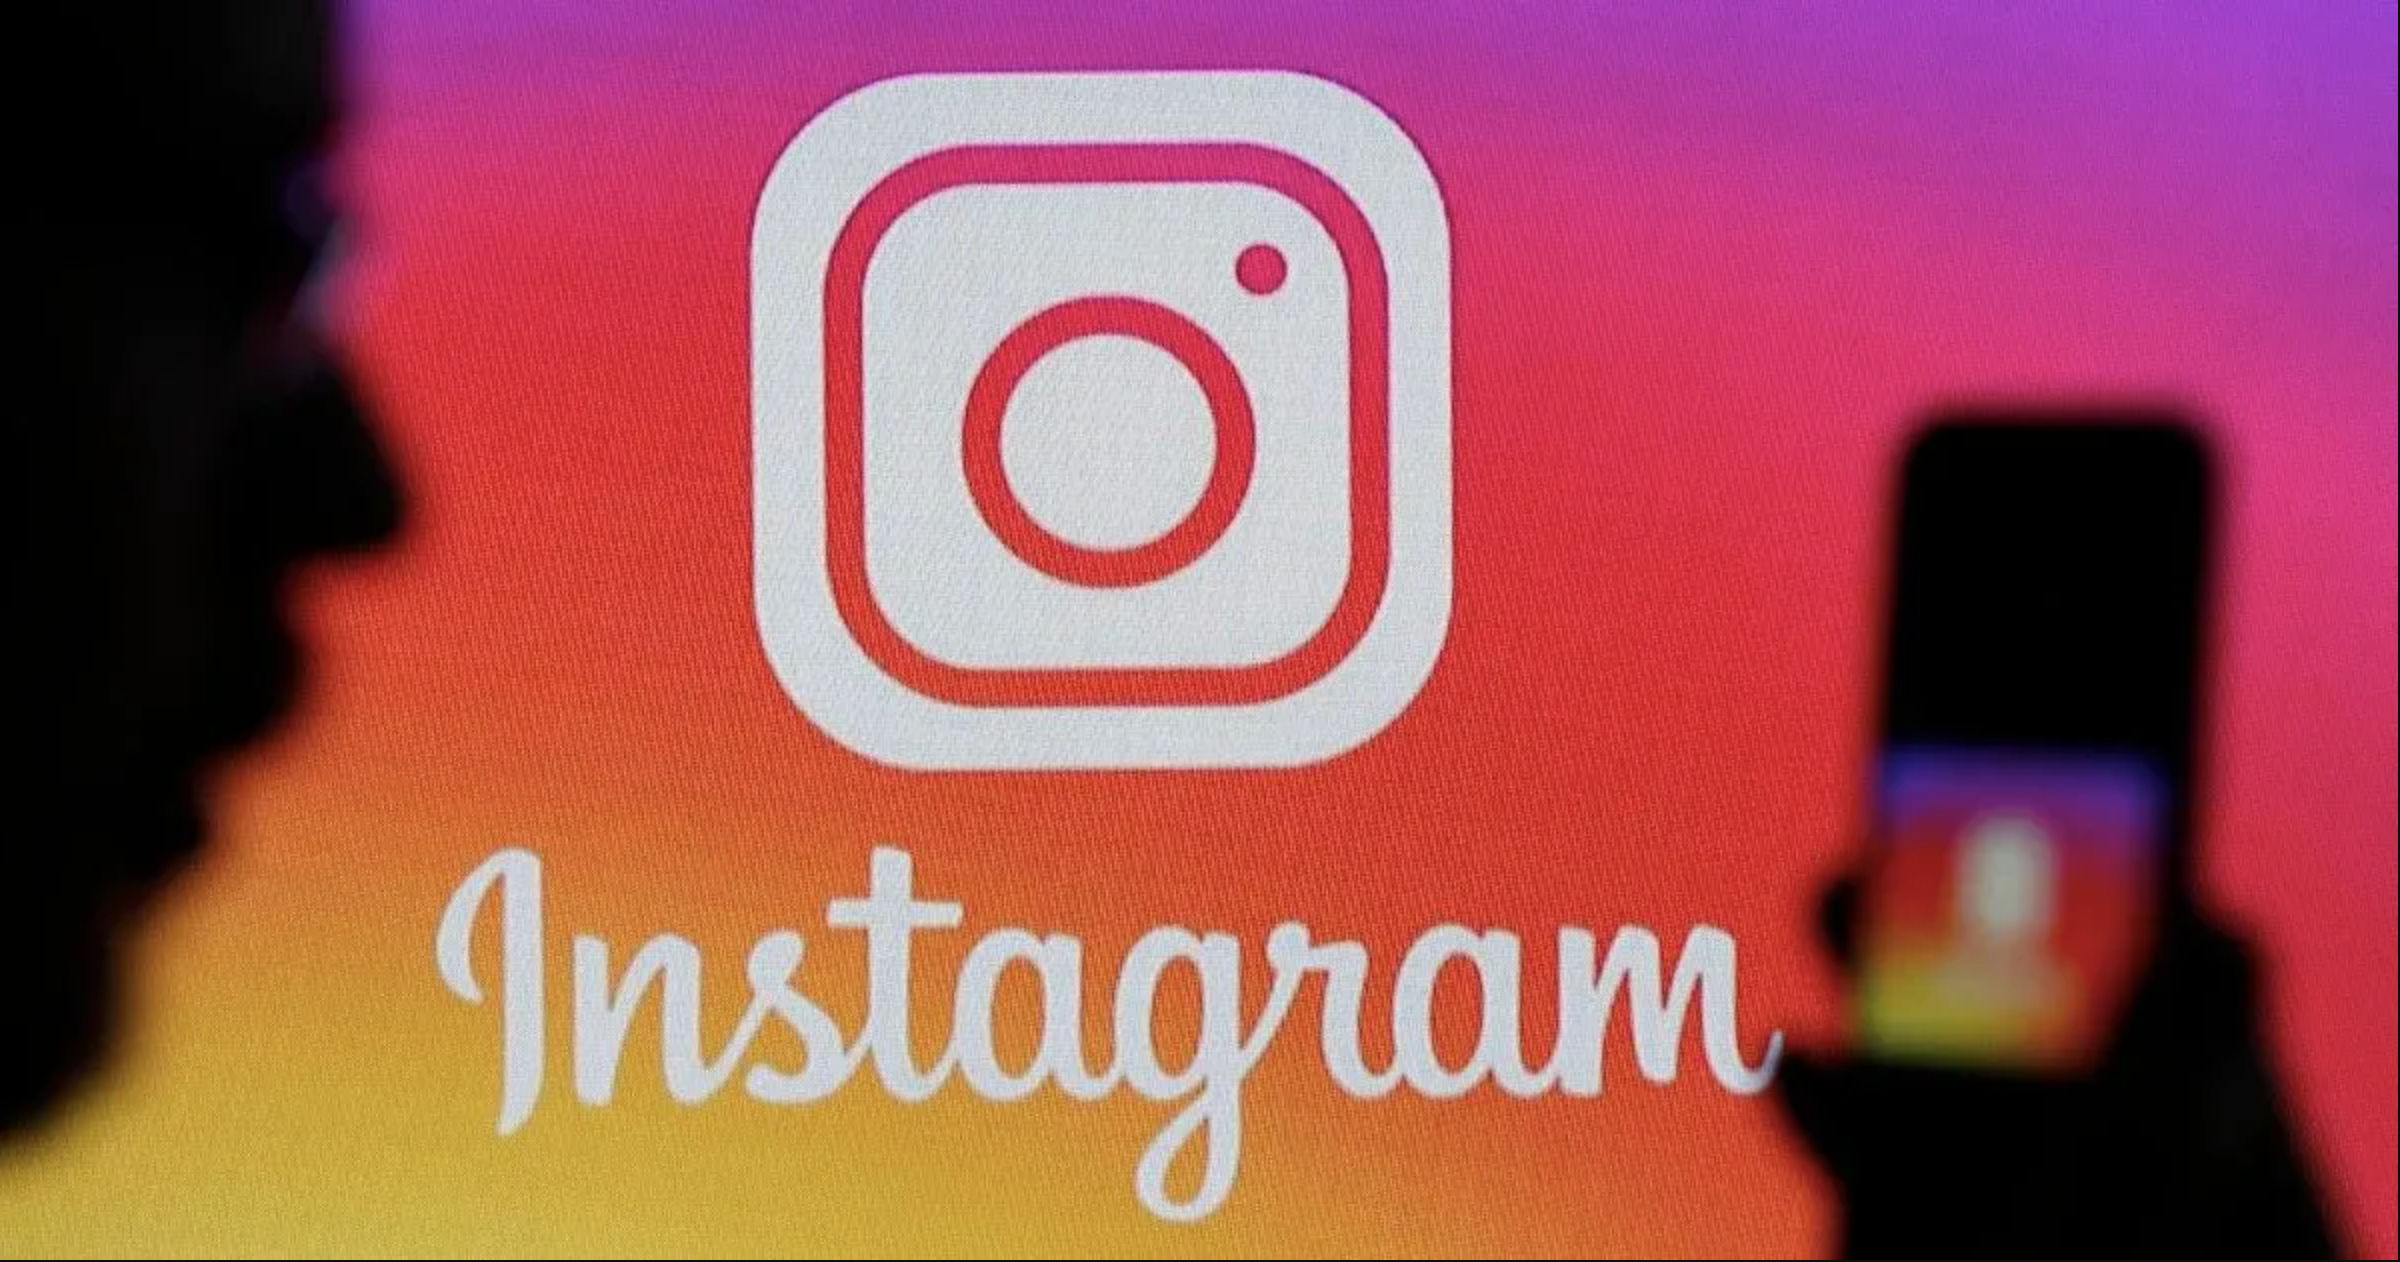 instagram account hacked heres how to recover your hacked instagram.png